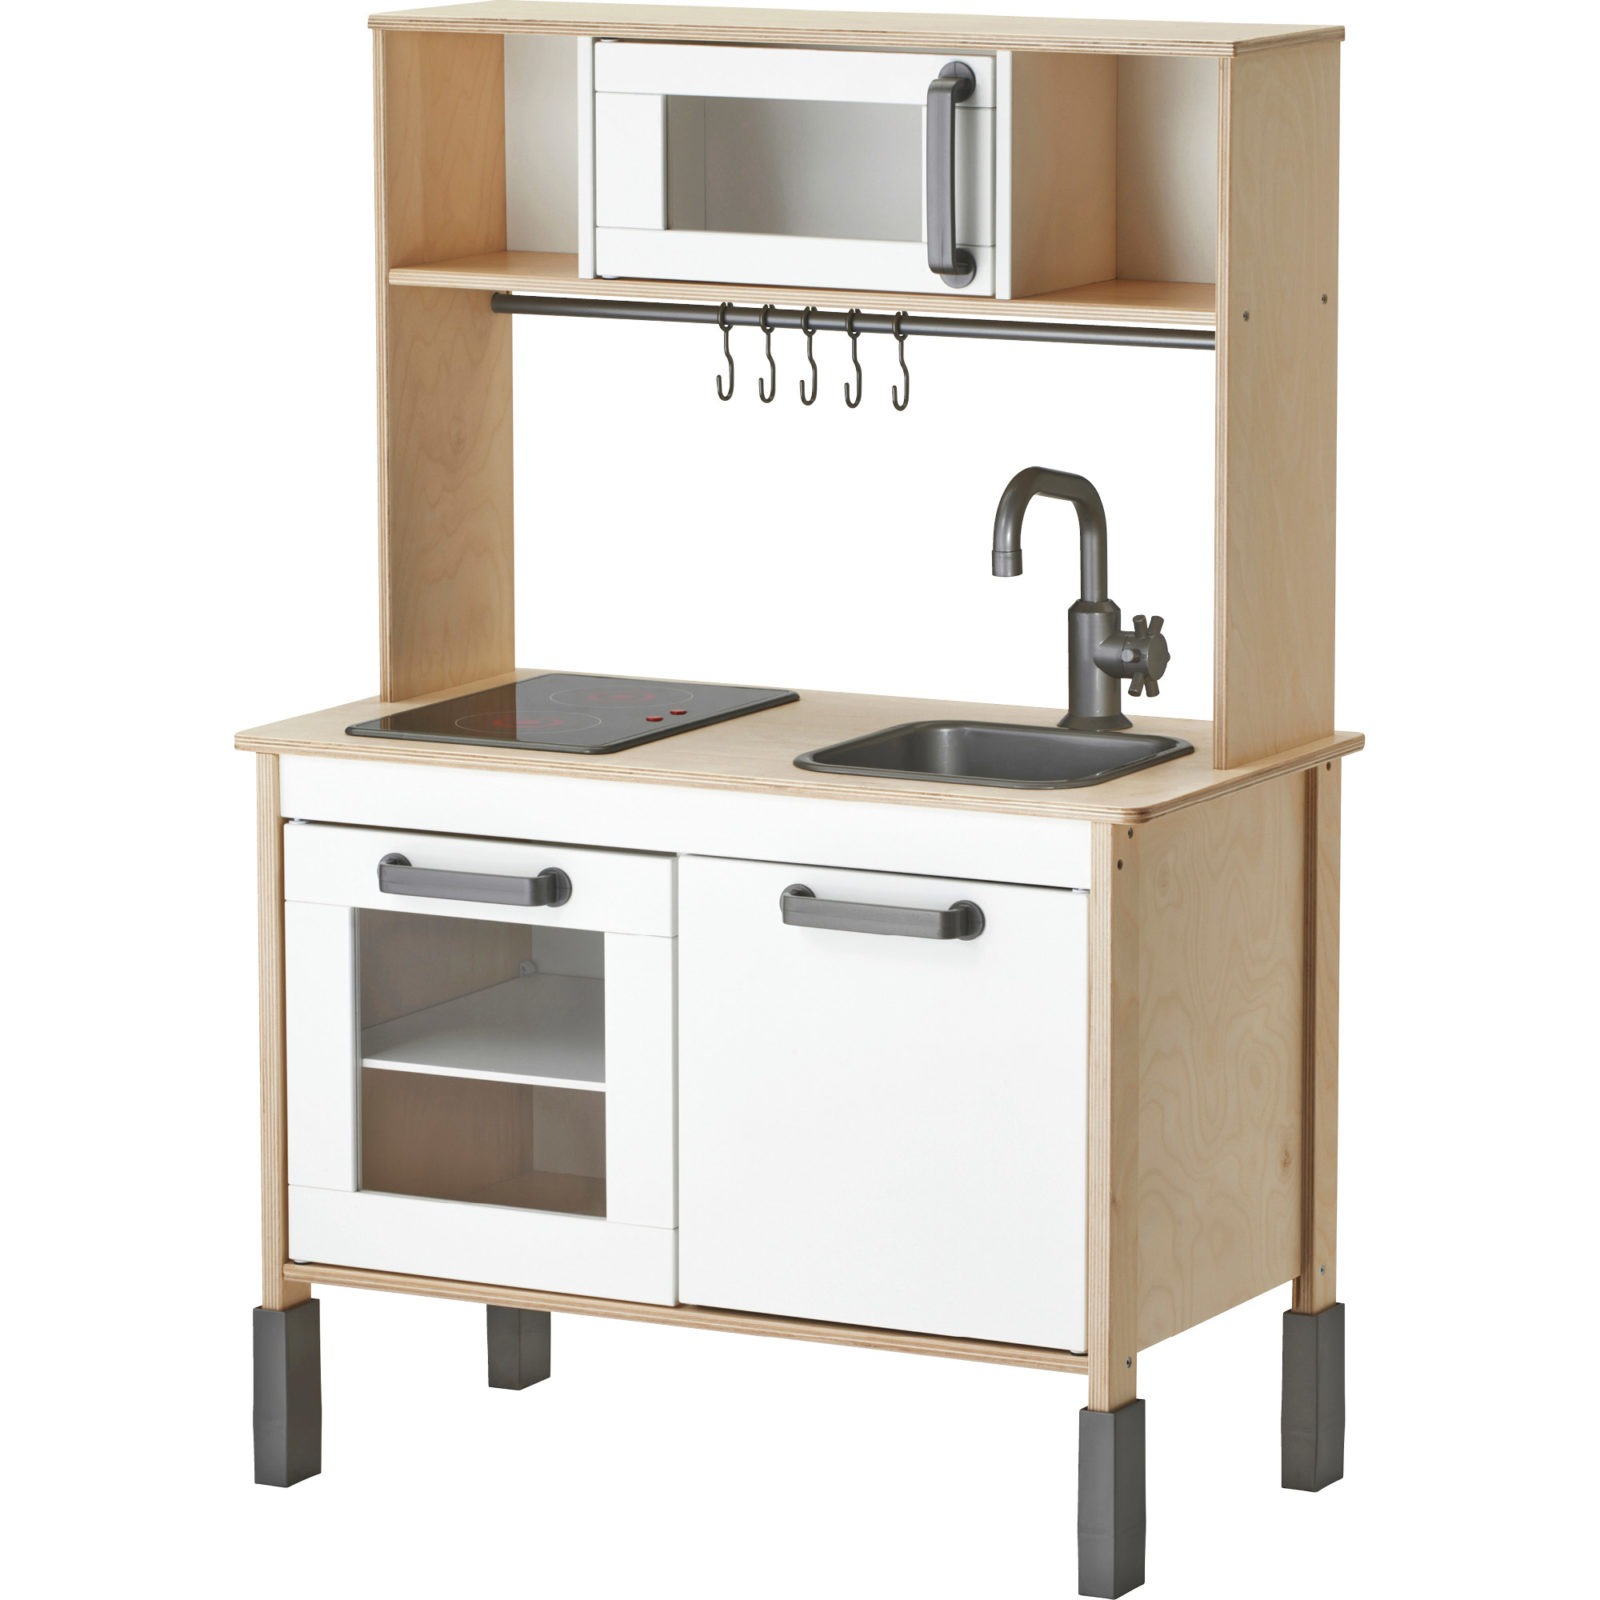 Play kitchen with battery-operated hob, cupboard and sink with mixer tap, DUKTIG.